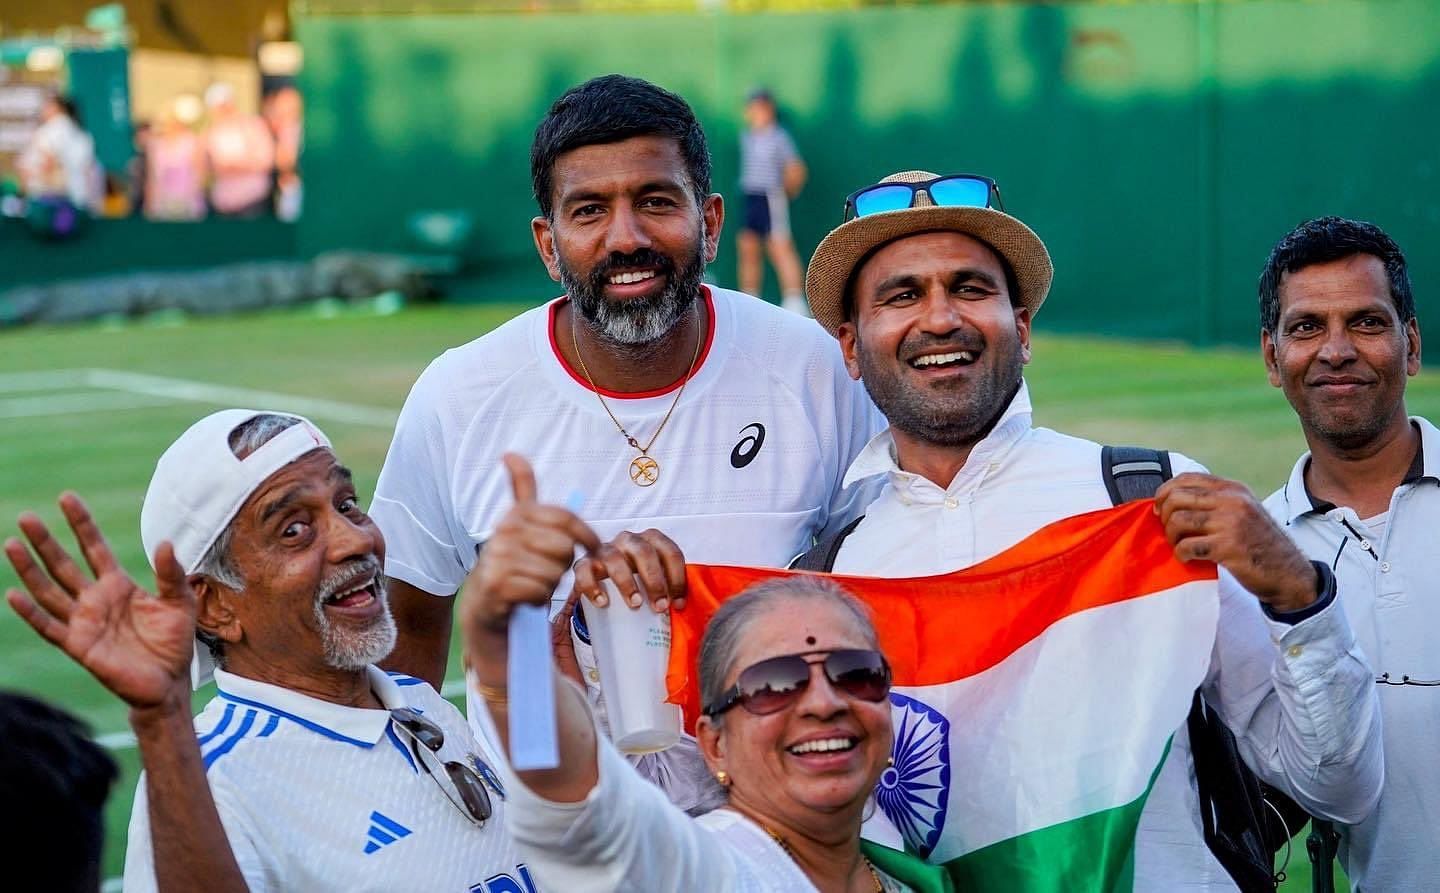 Rohan Bopanna with Indian fans (Image via Twitter)